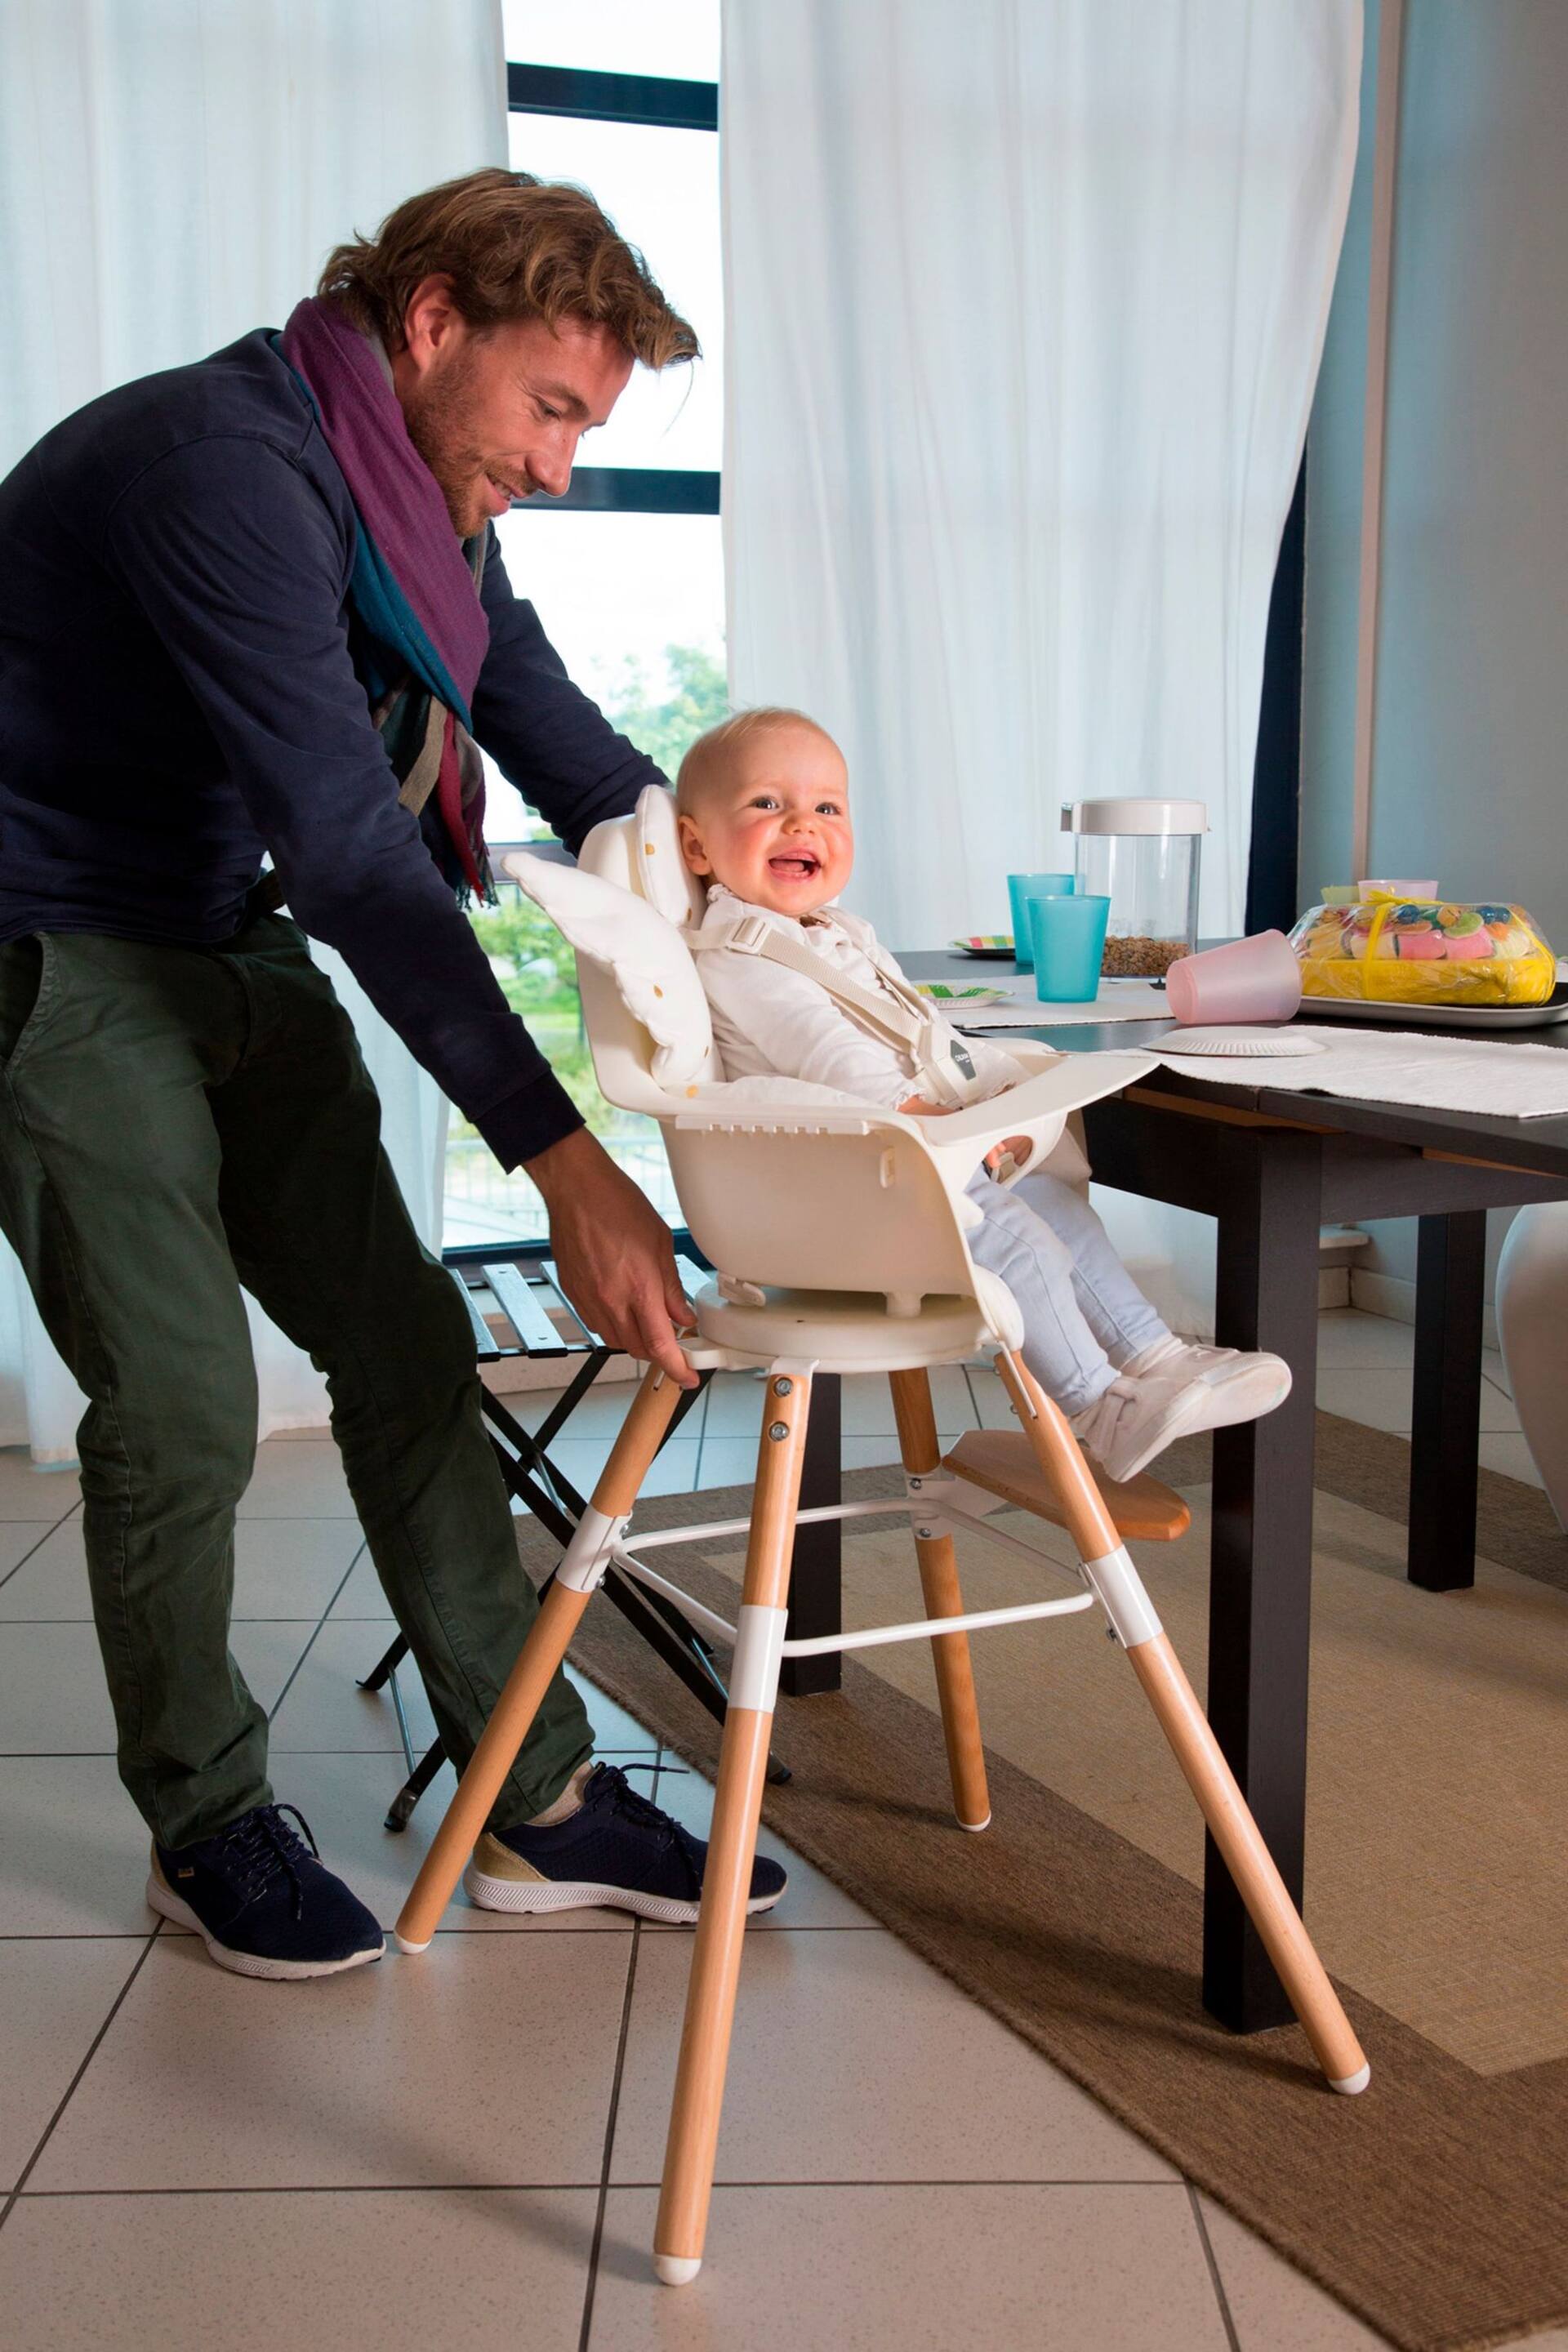 Childhome White Evolu One 80° High Chair White - Image 1 of 10